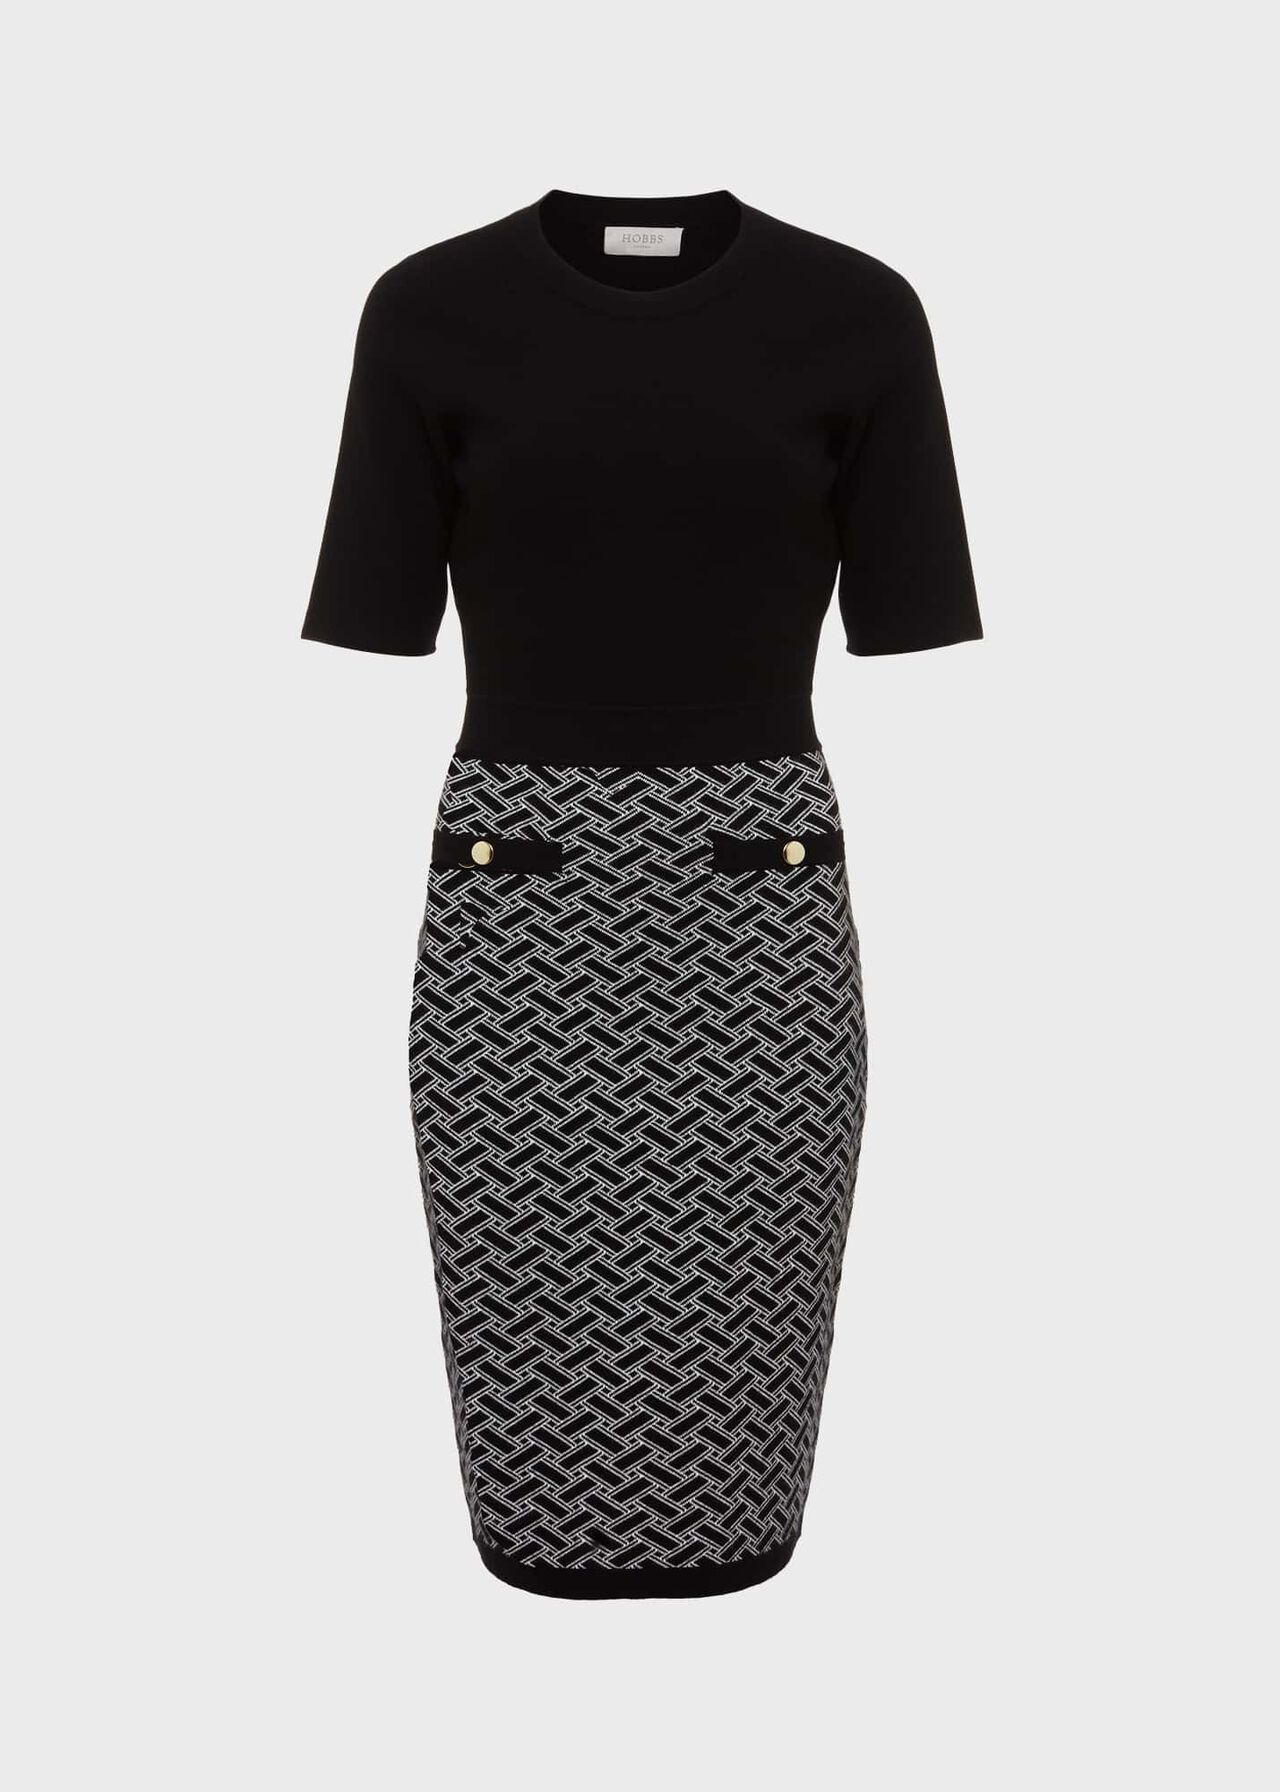 Petite Perrie Knitted Dress, Black Ivory, hi-res